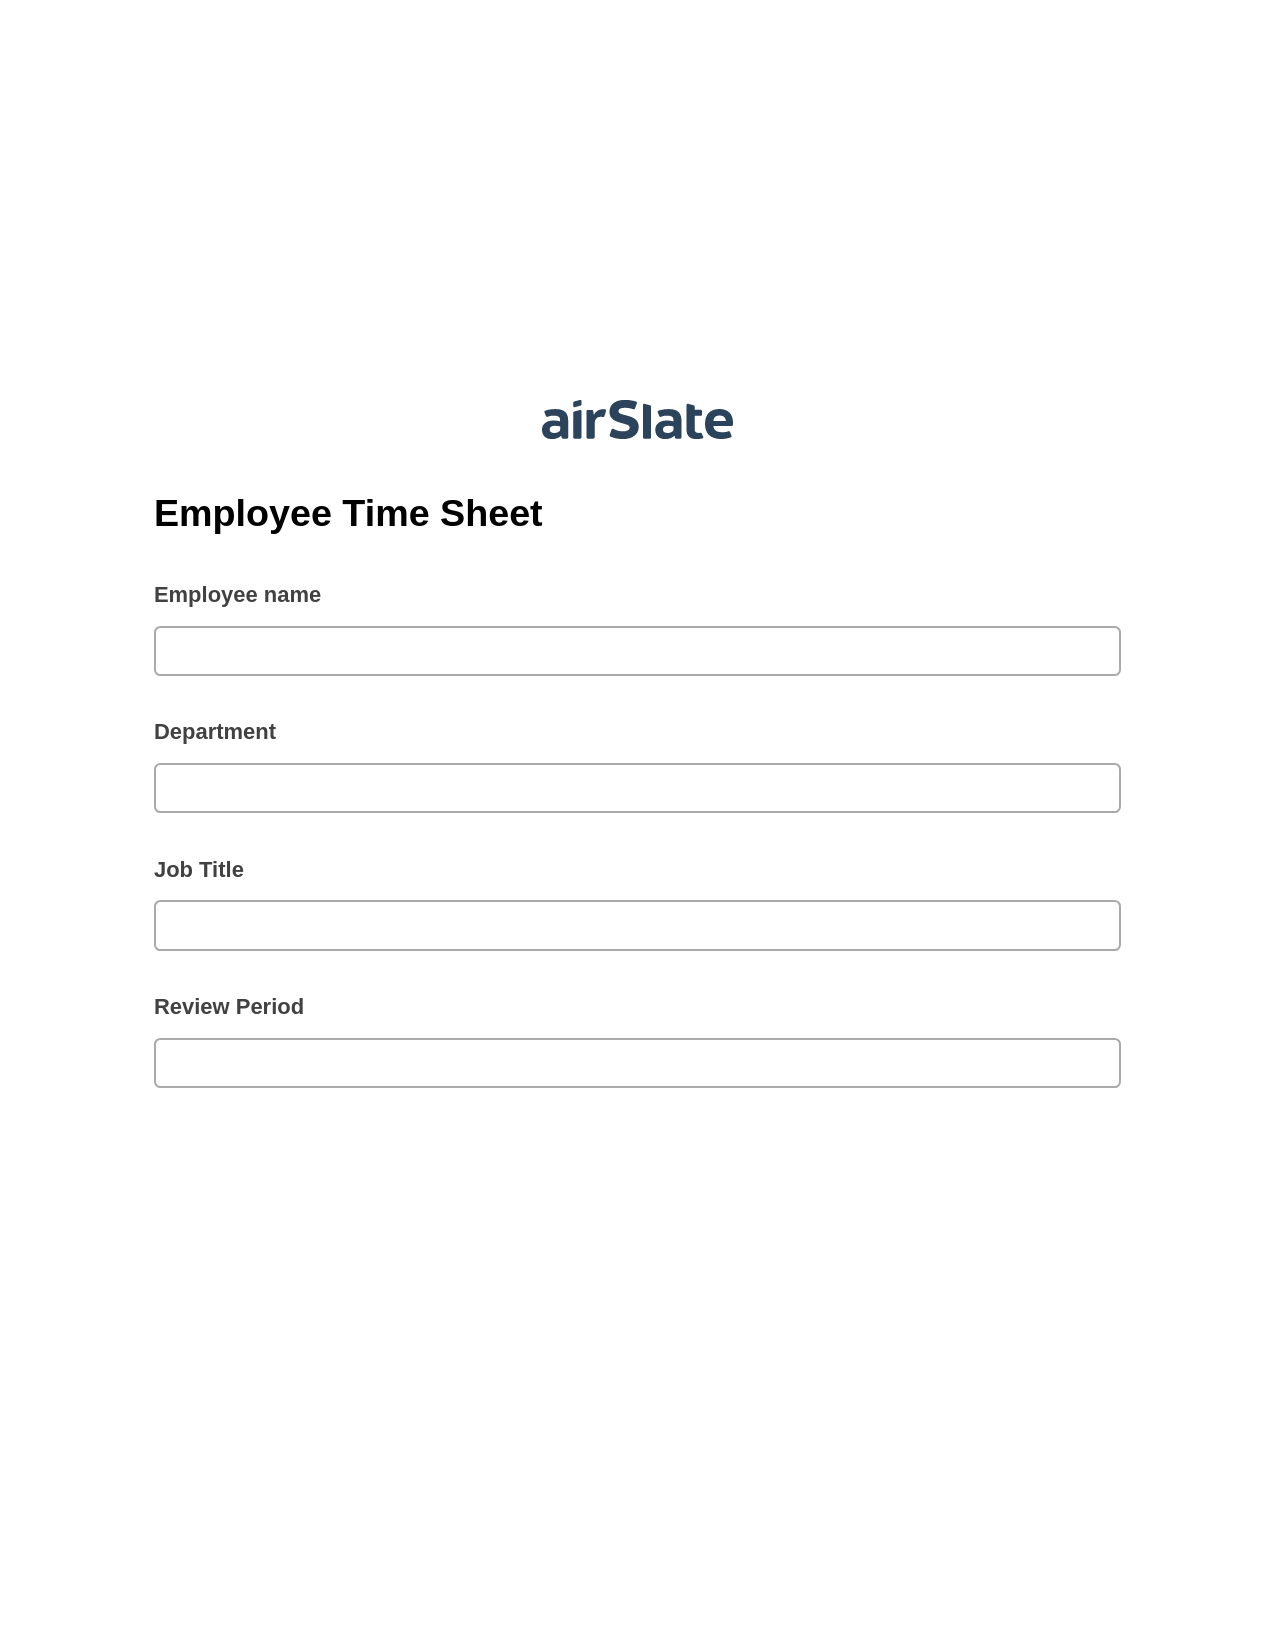 Employee Time Sheet Pre-fill from Excel Spreadsheet Bot, Create Salesforce Records Bot, Archive to Box Bot